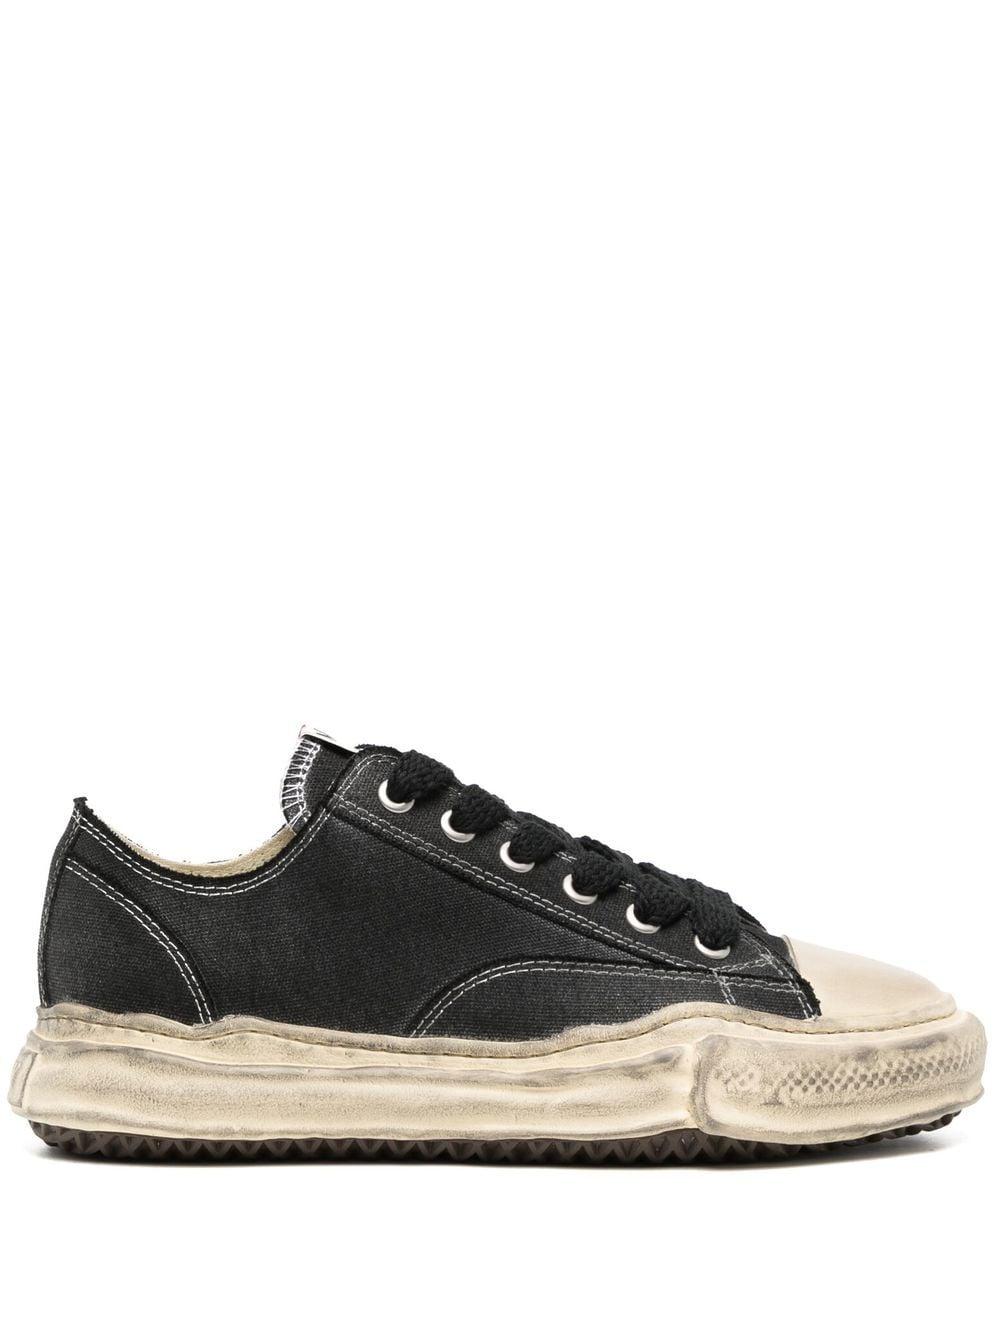 Maison Mihara Yasuhiro Distressed Low-top Trainers in Black | Lyst